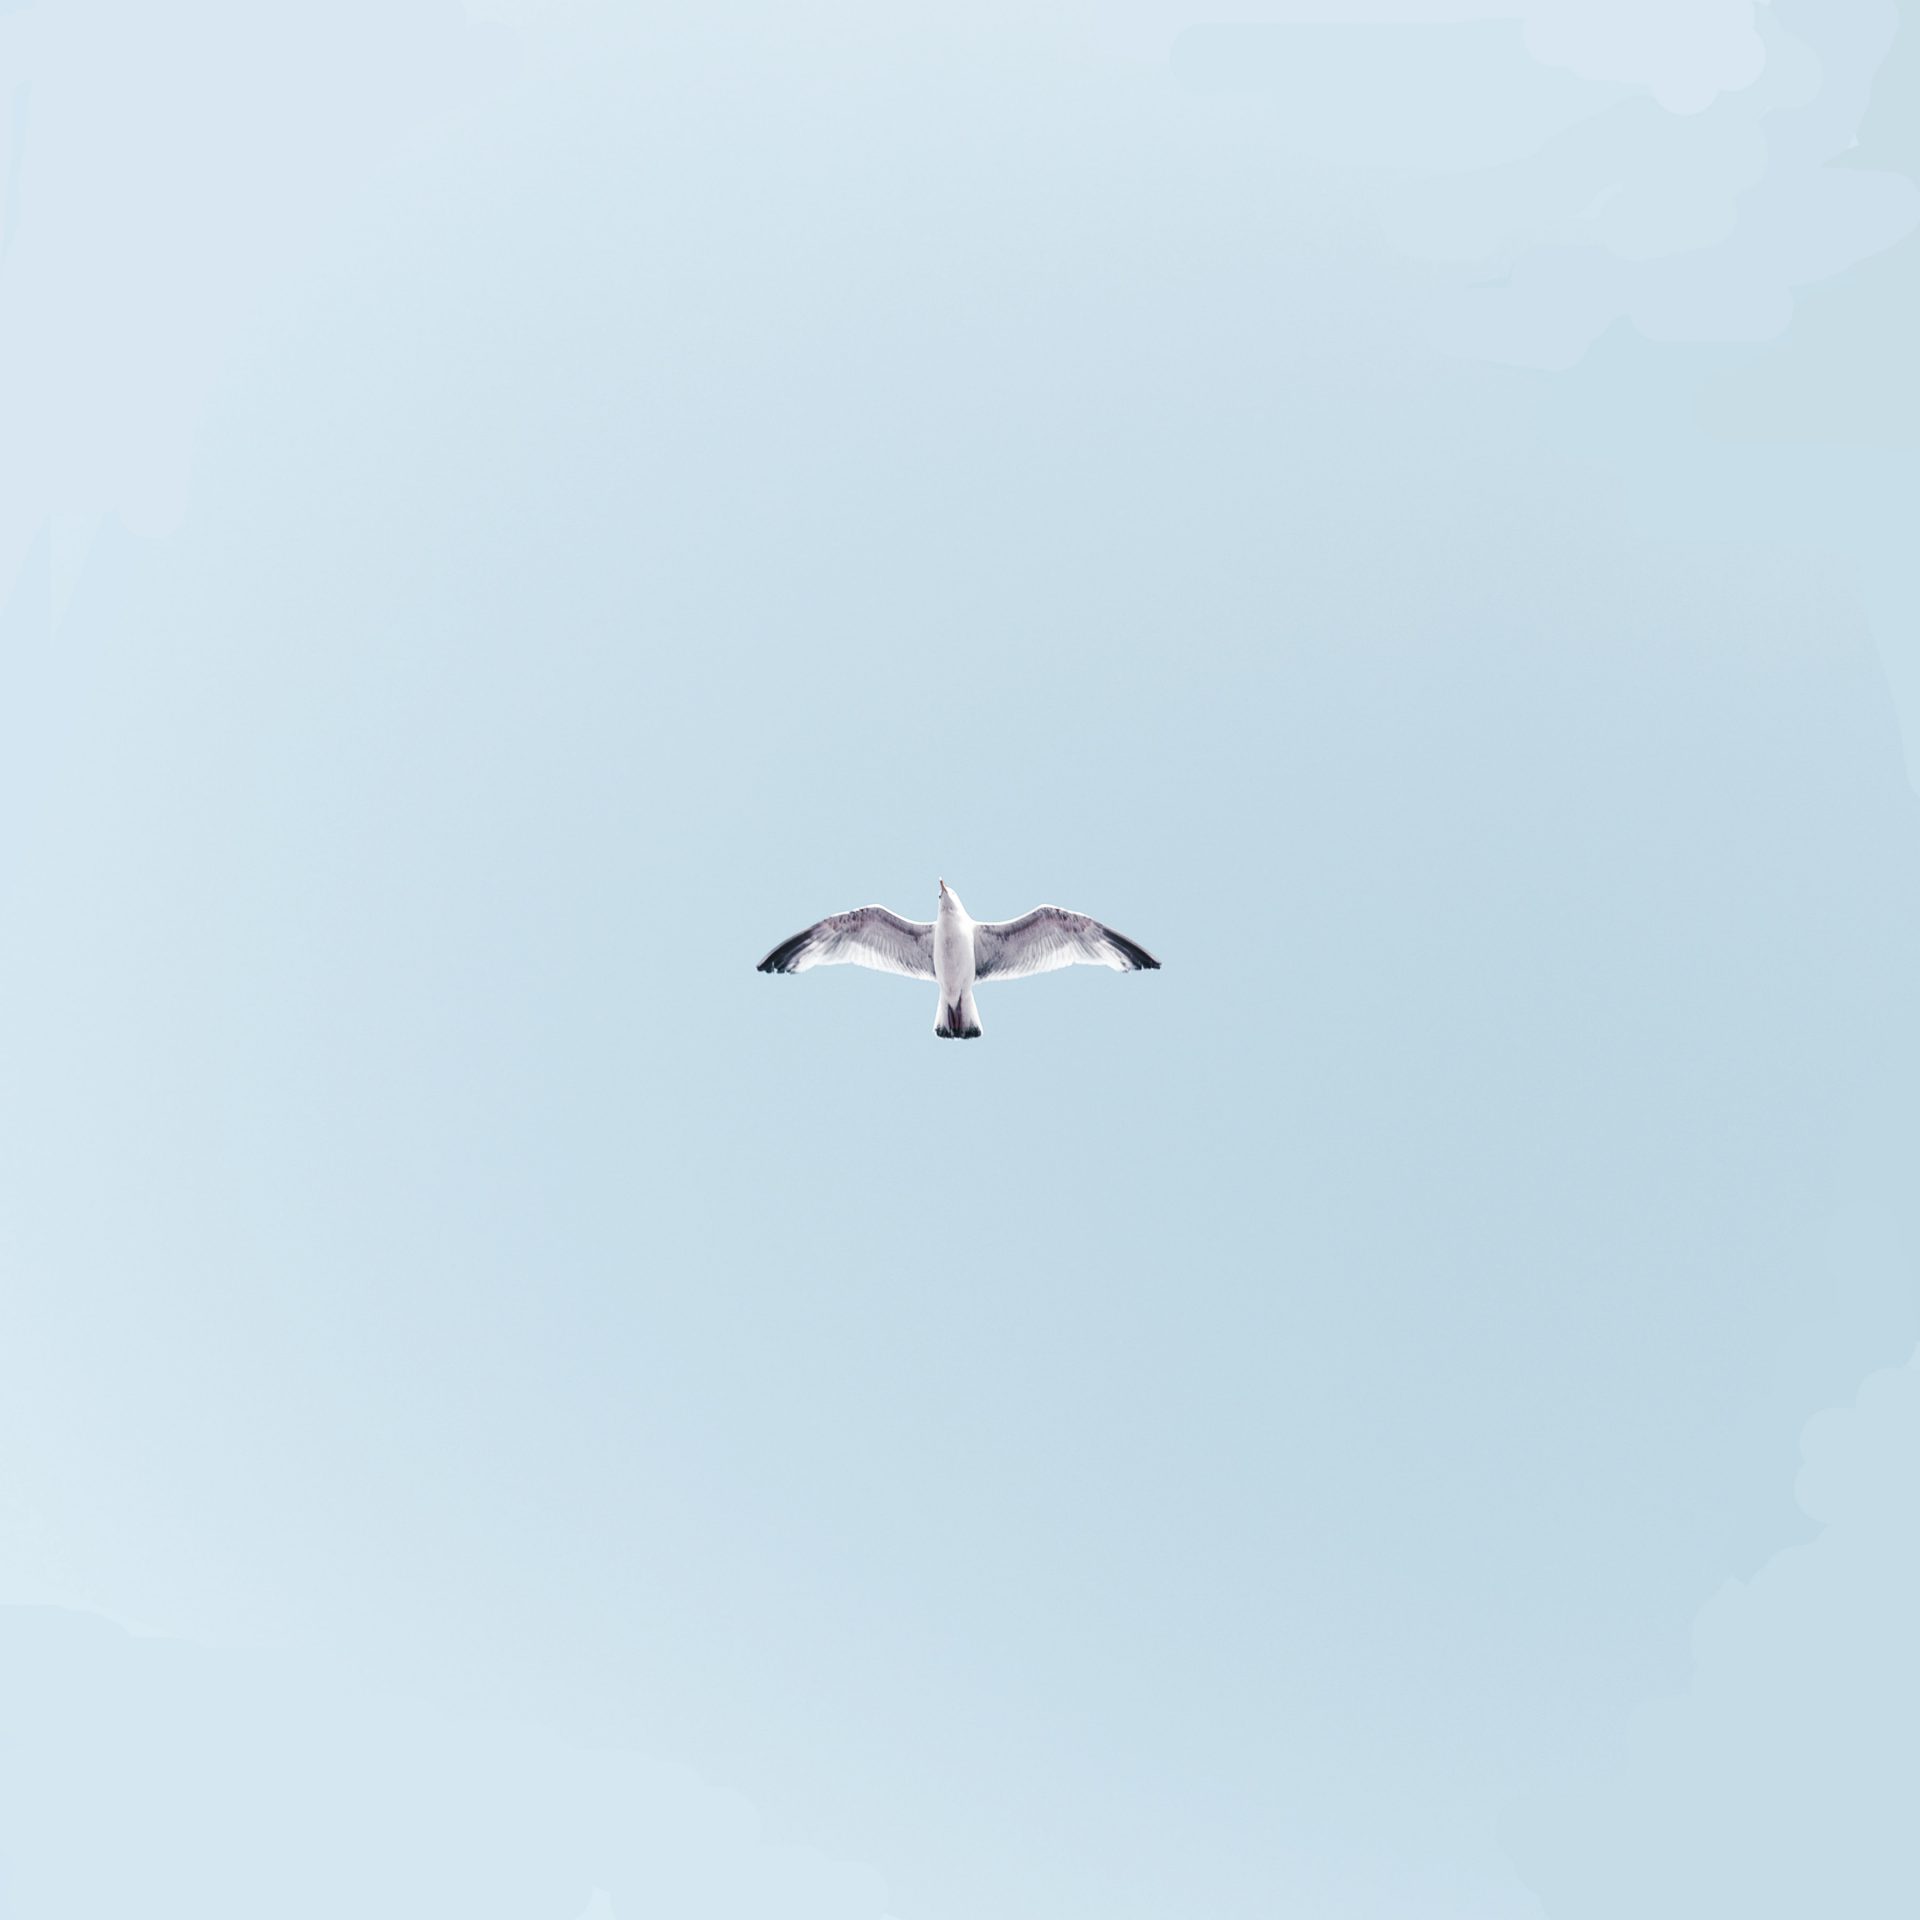 A bird flying in the sky with its wings spread.